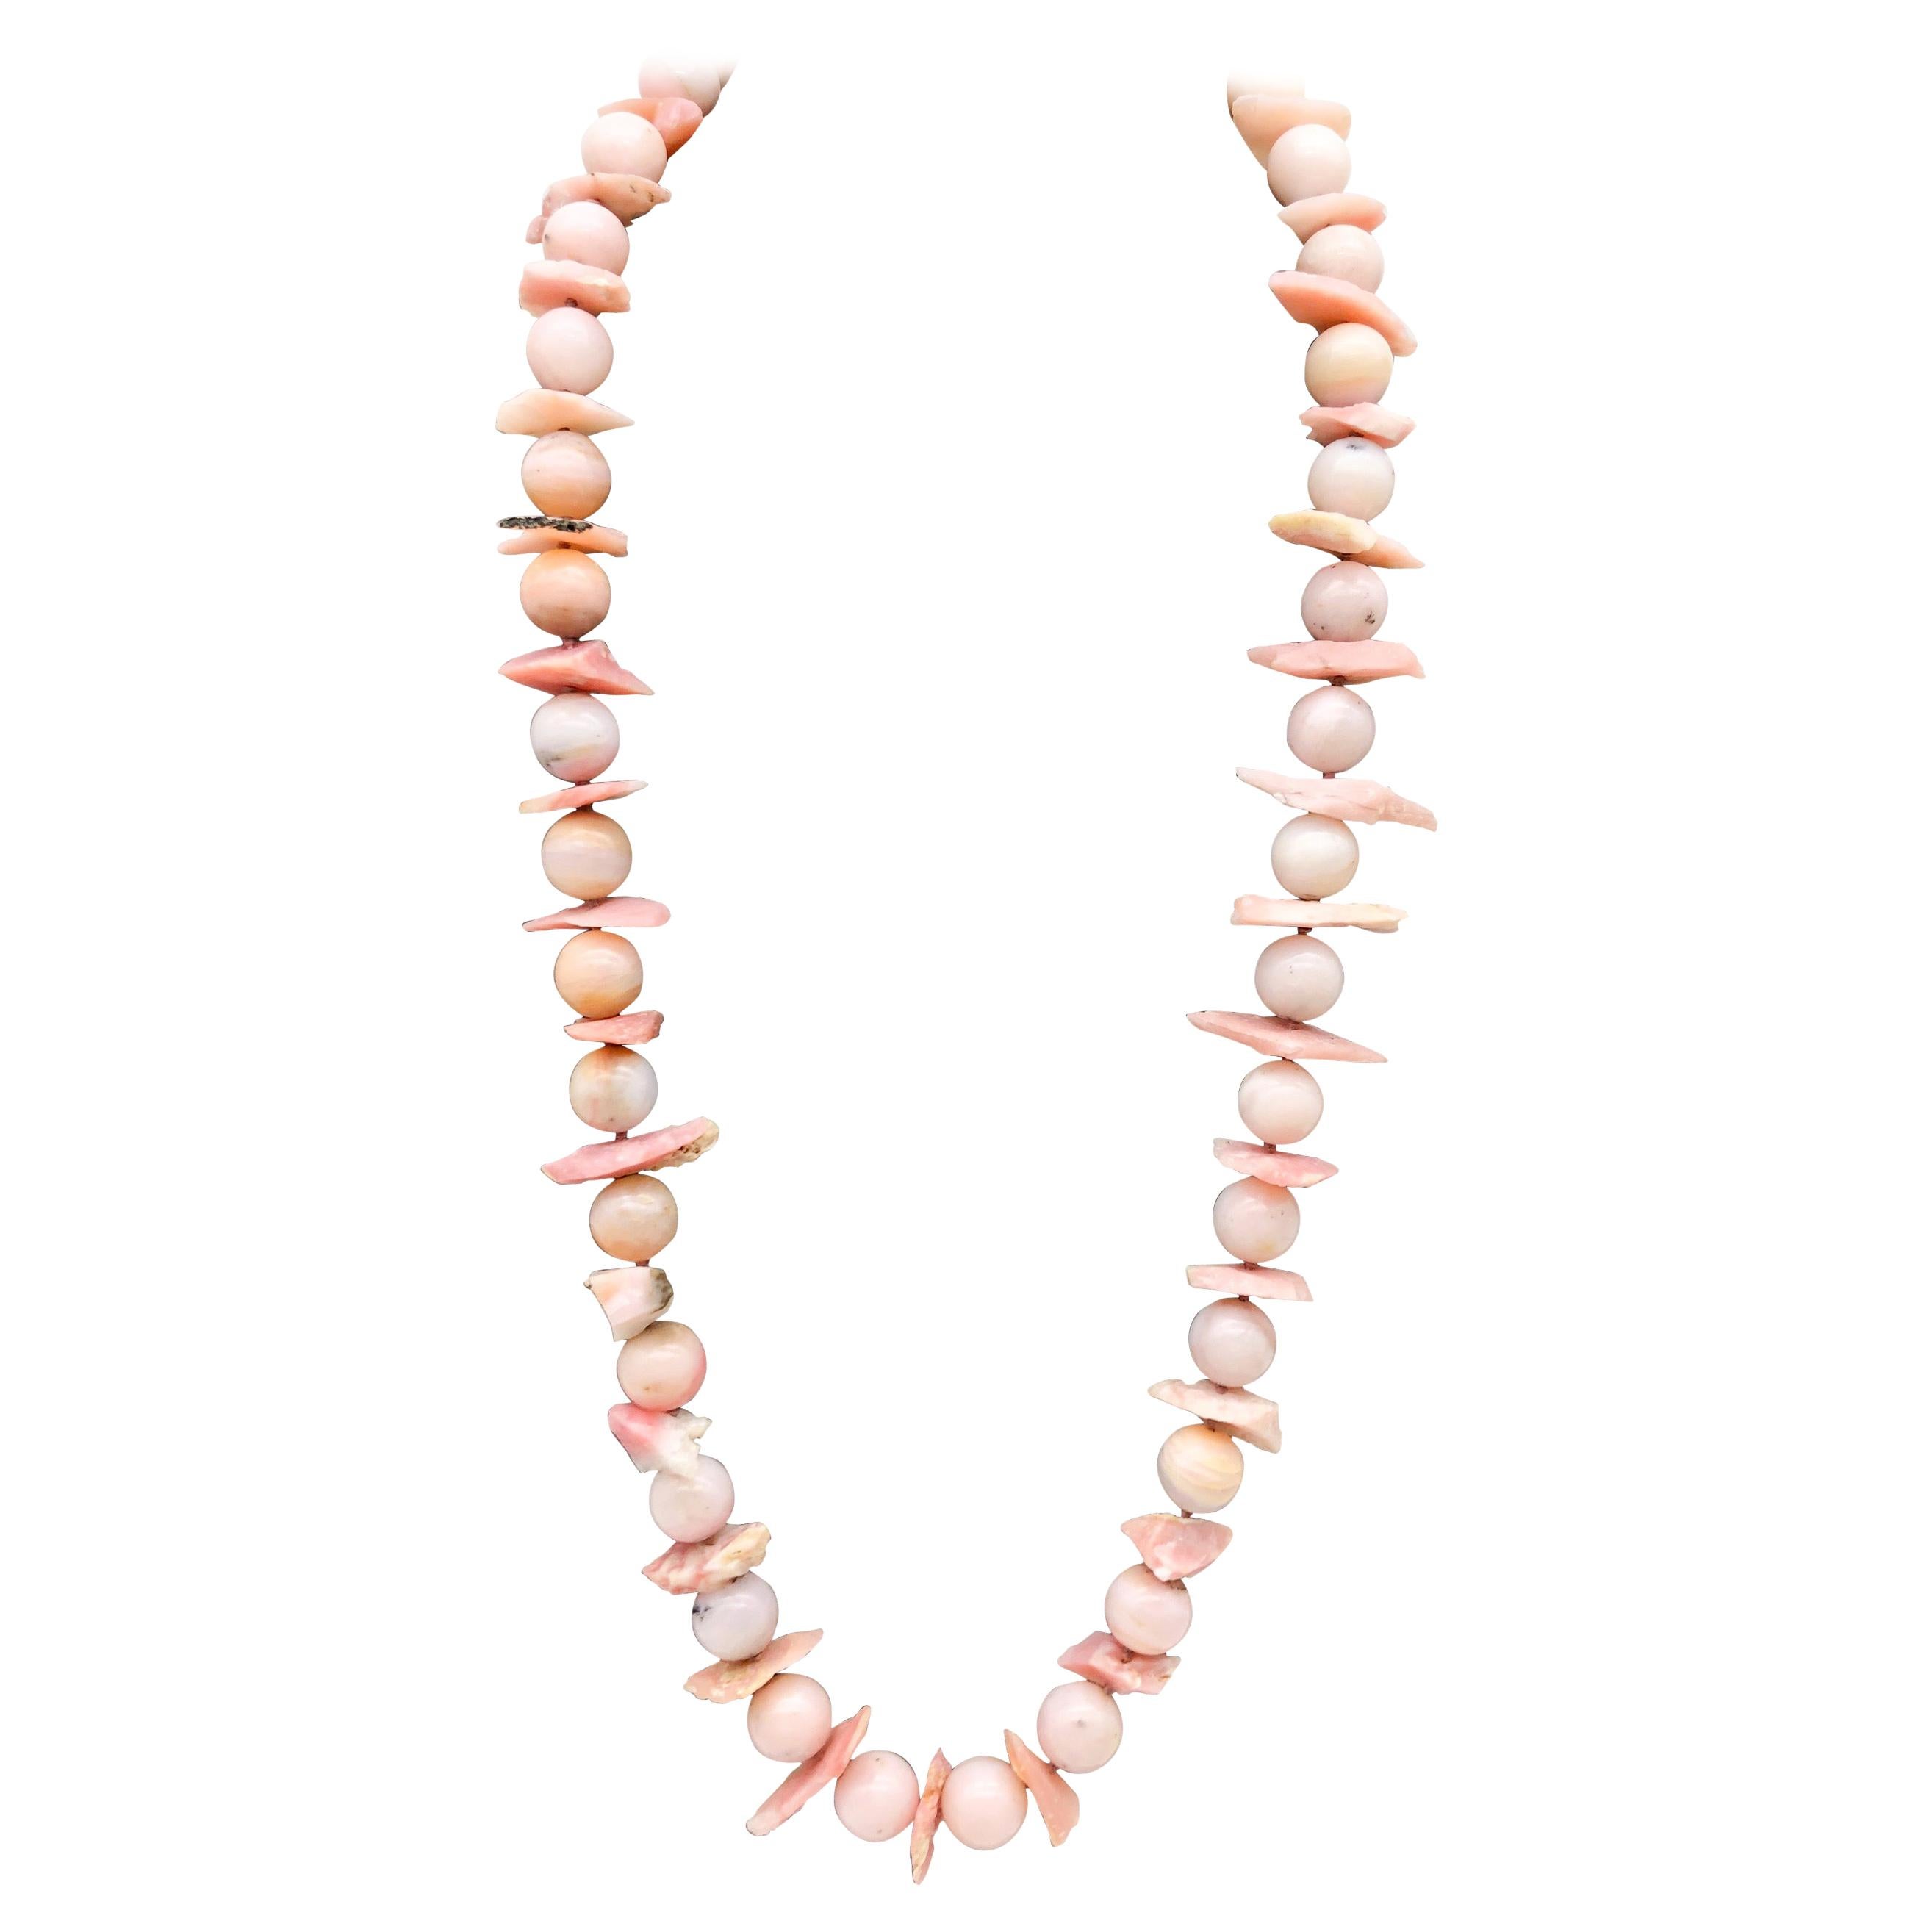 One-of-a-Kind
Unlike most you'll ever see, a necklace with opaque Pink Peruvian Opal polished beads is unique in its shadings and natural patterns. Together, the large 14mm beads create a one-of-a-kind showcase for the popular blush-pink palette.